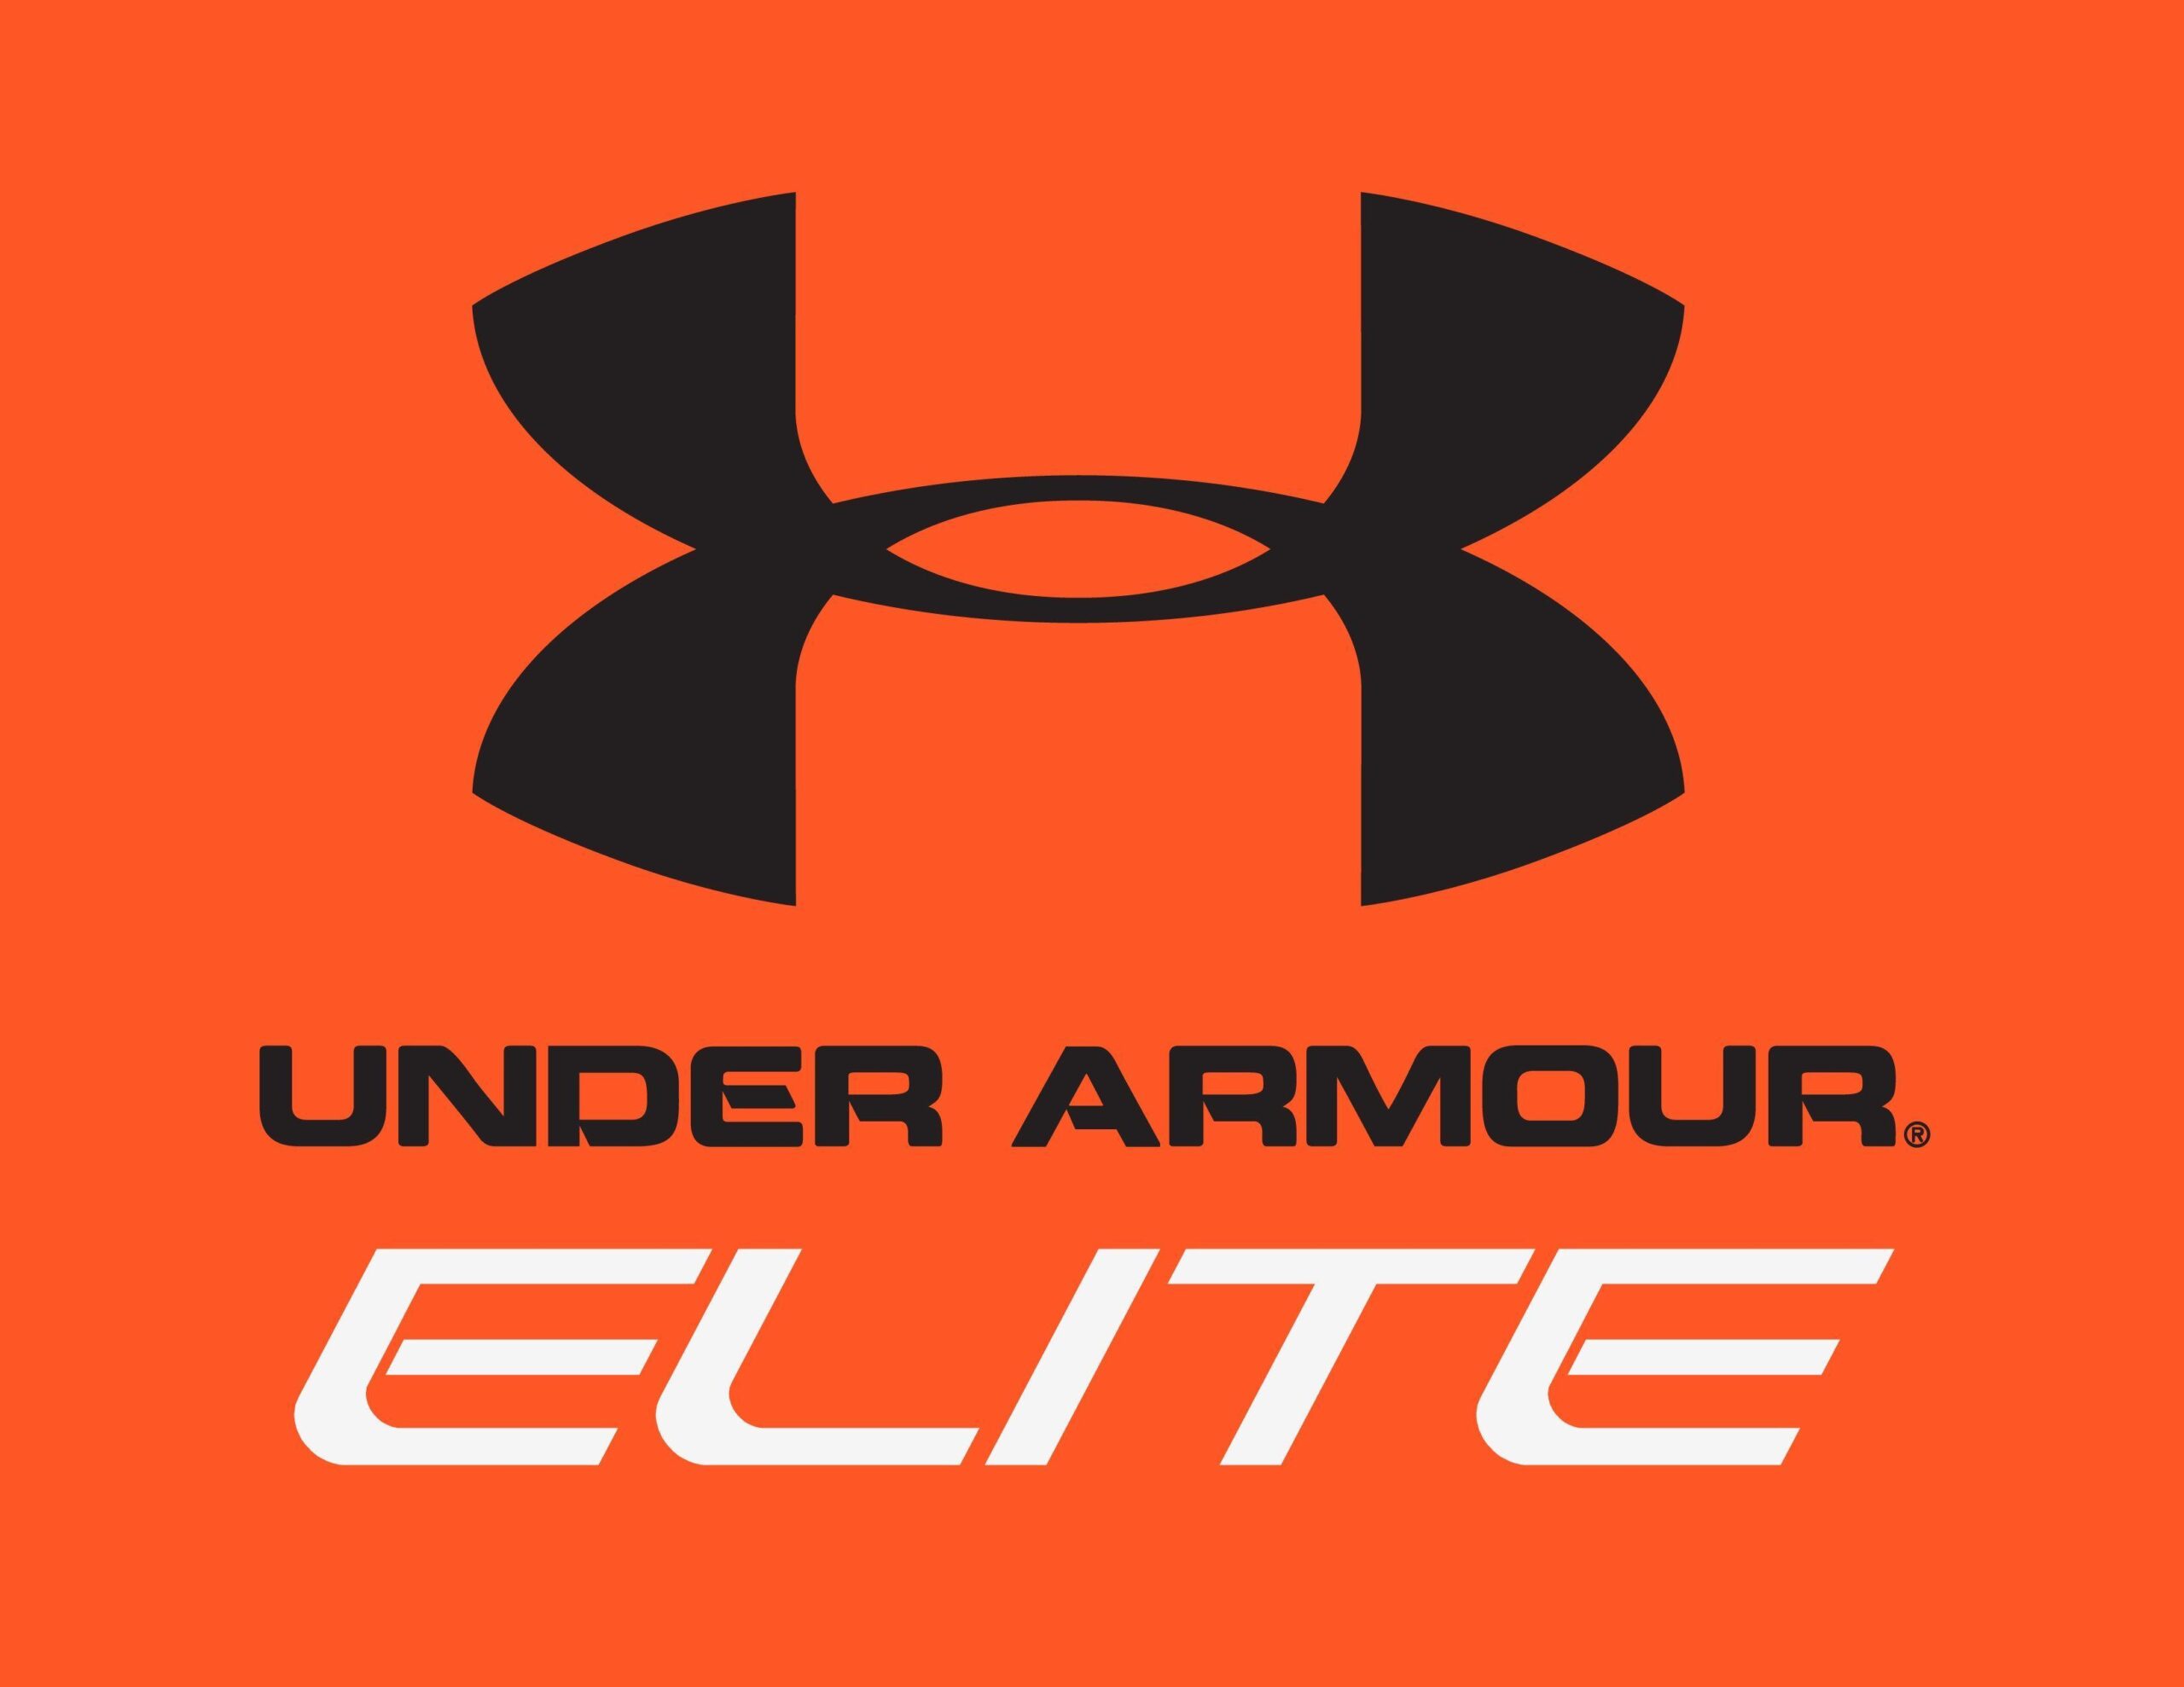 Under Armour Best Wallpaper Hd, Under Armour, Other